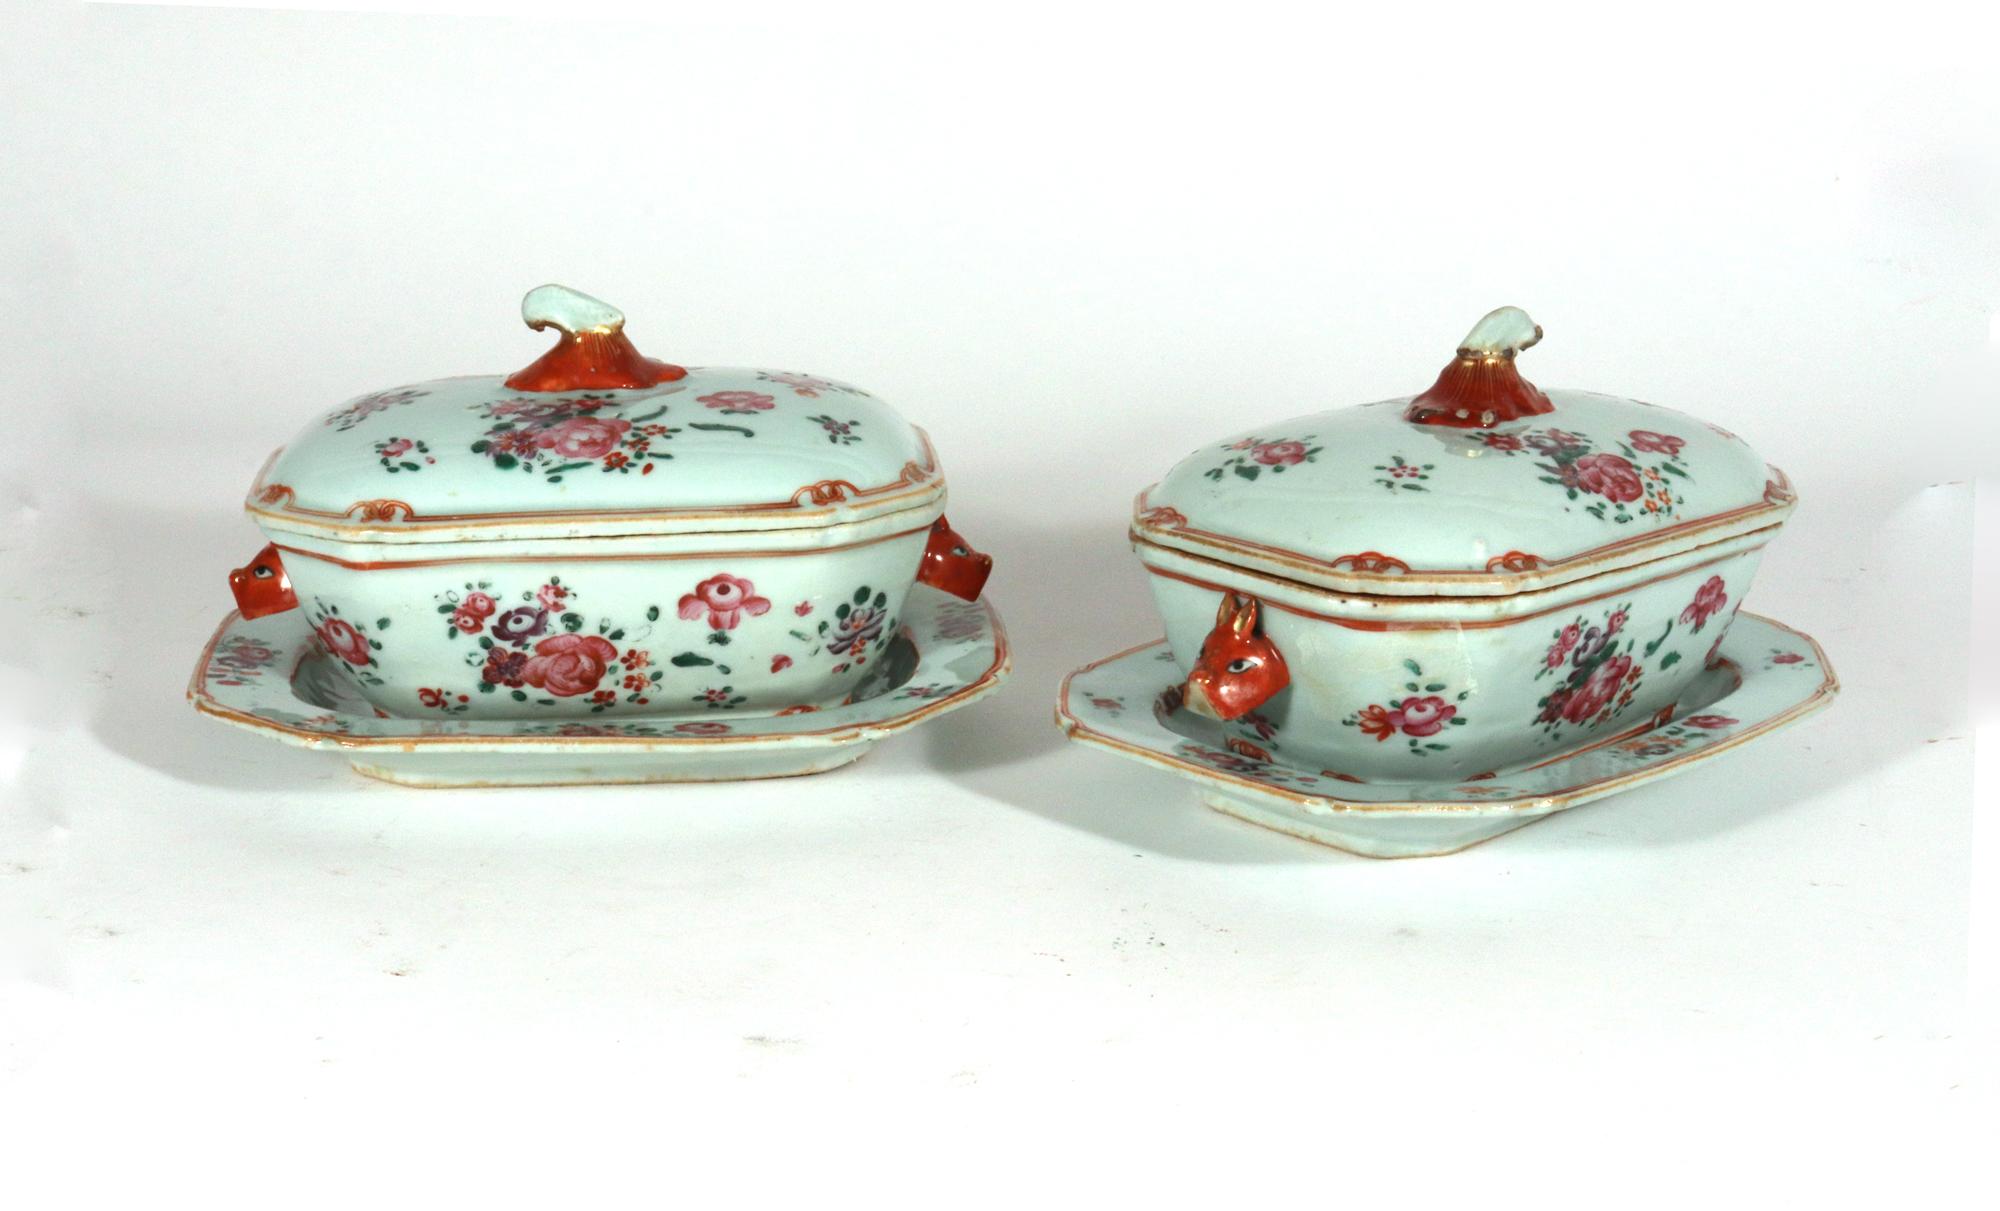 Chinese Export Porcelain Famille Rose Sauce Tureens, Covers & Stands For Sale 1